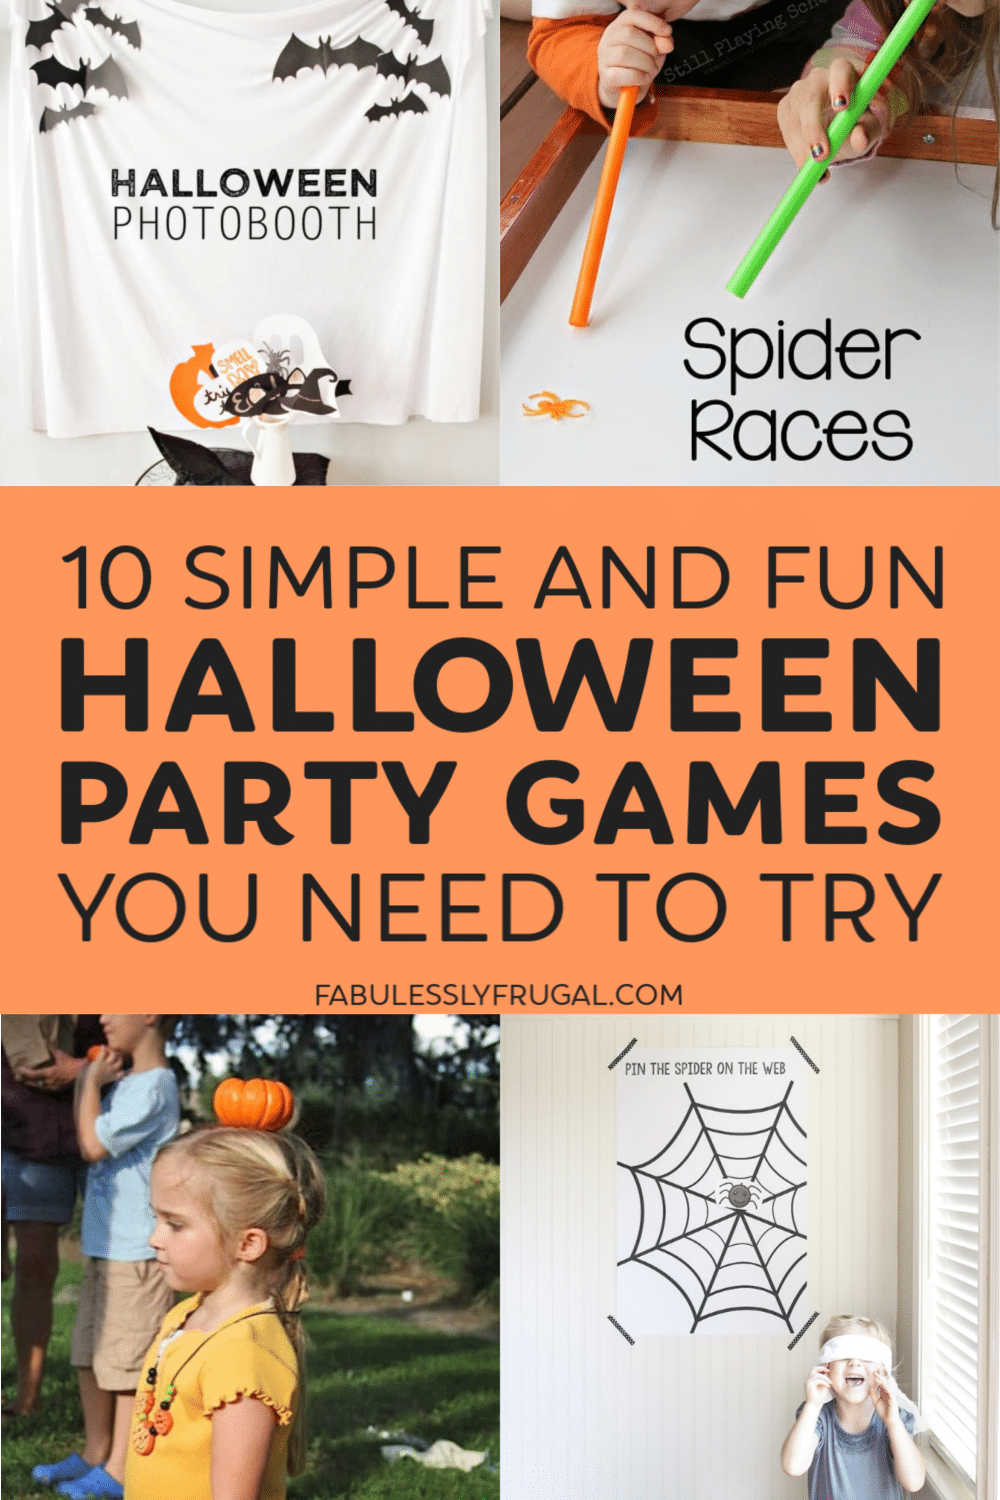 Halloween themed games and activities